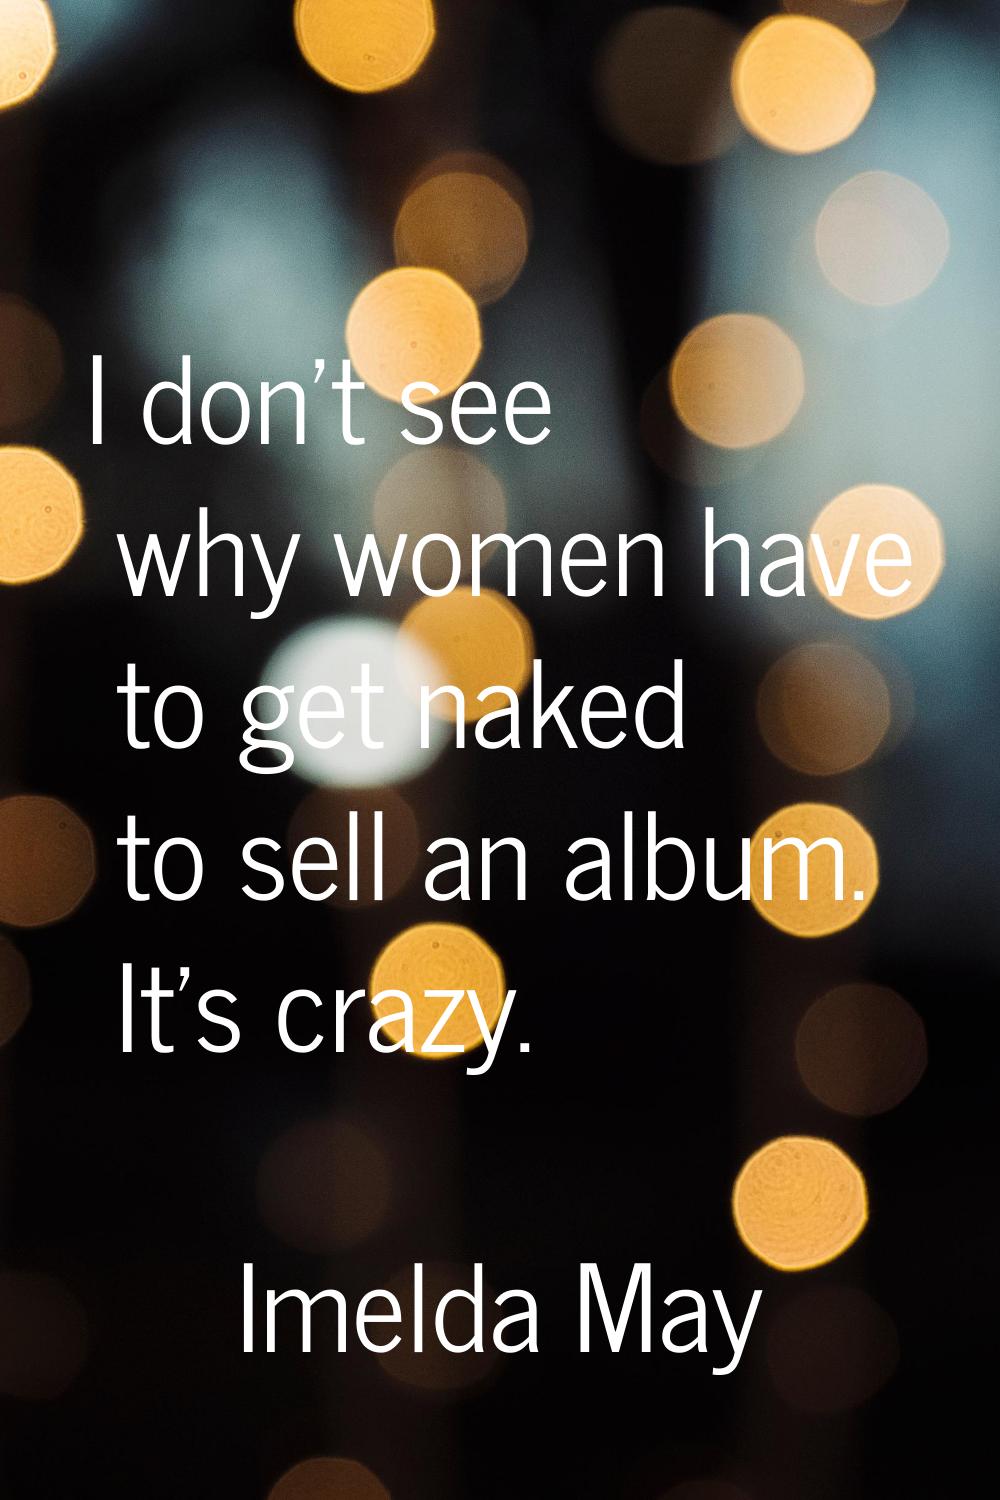 I don't see why women have to get naked to sell an album. It's crazy.